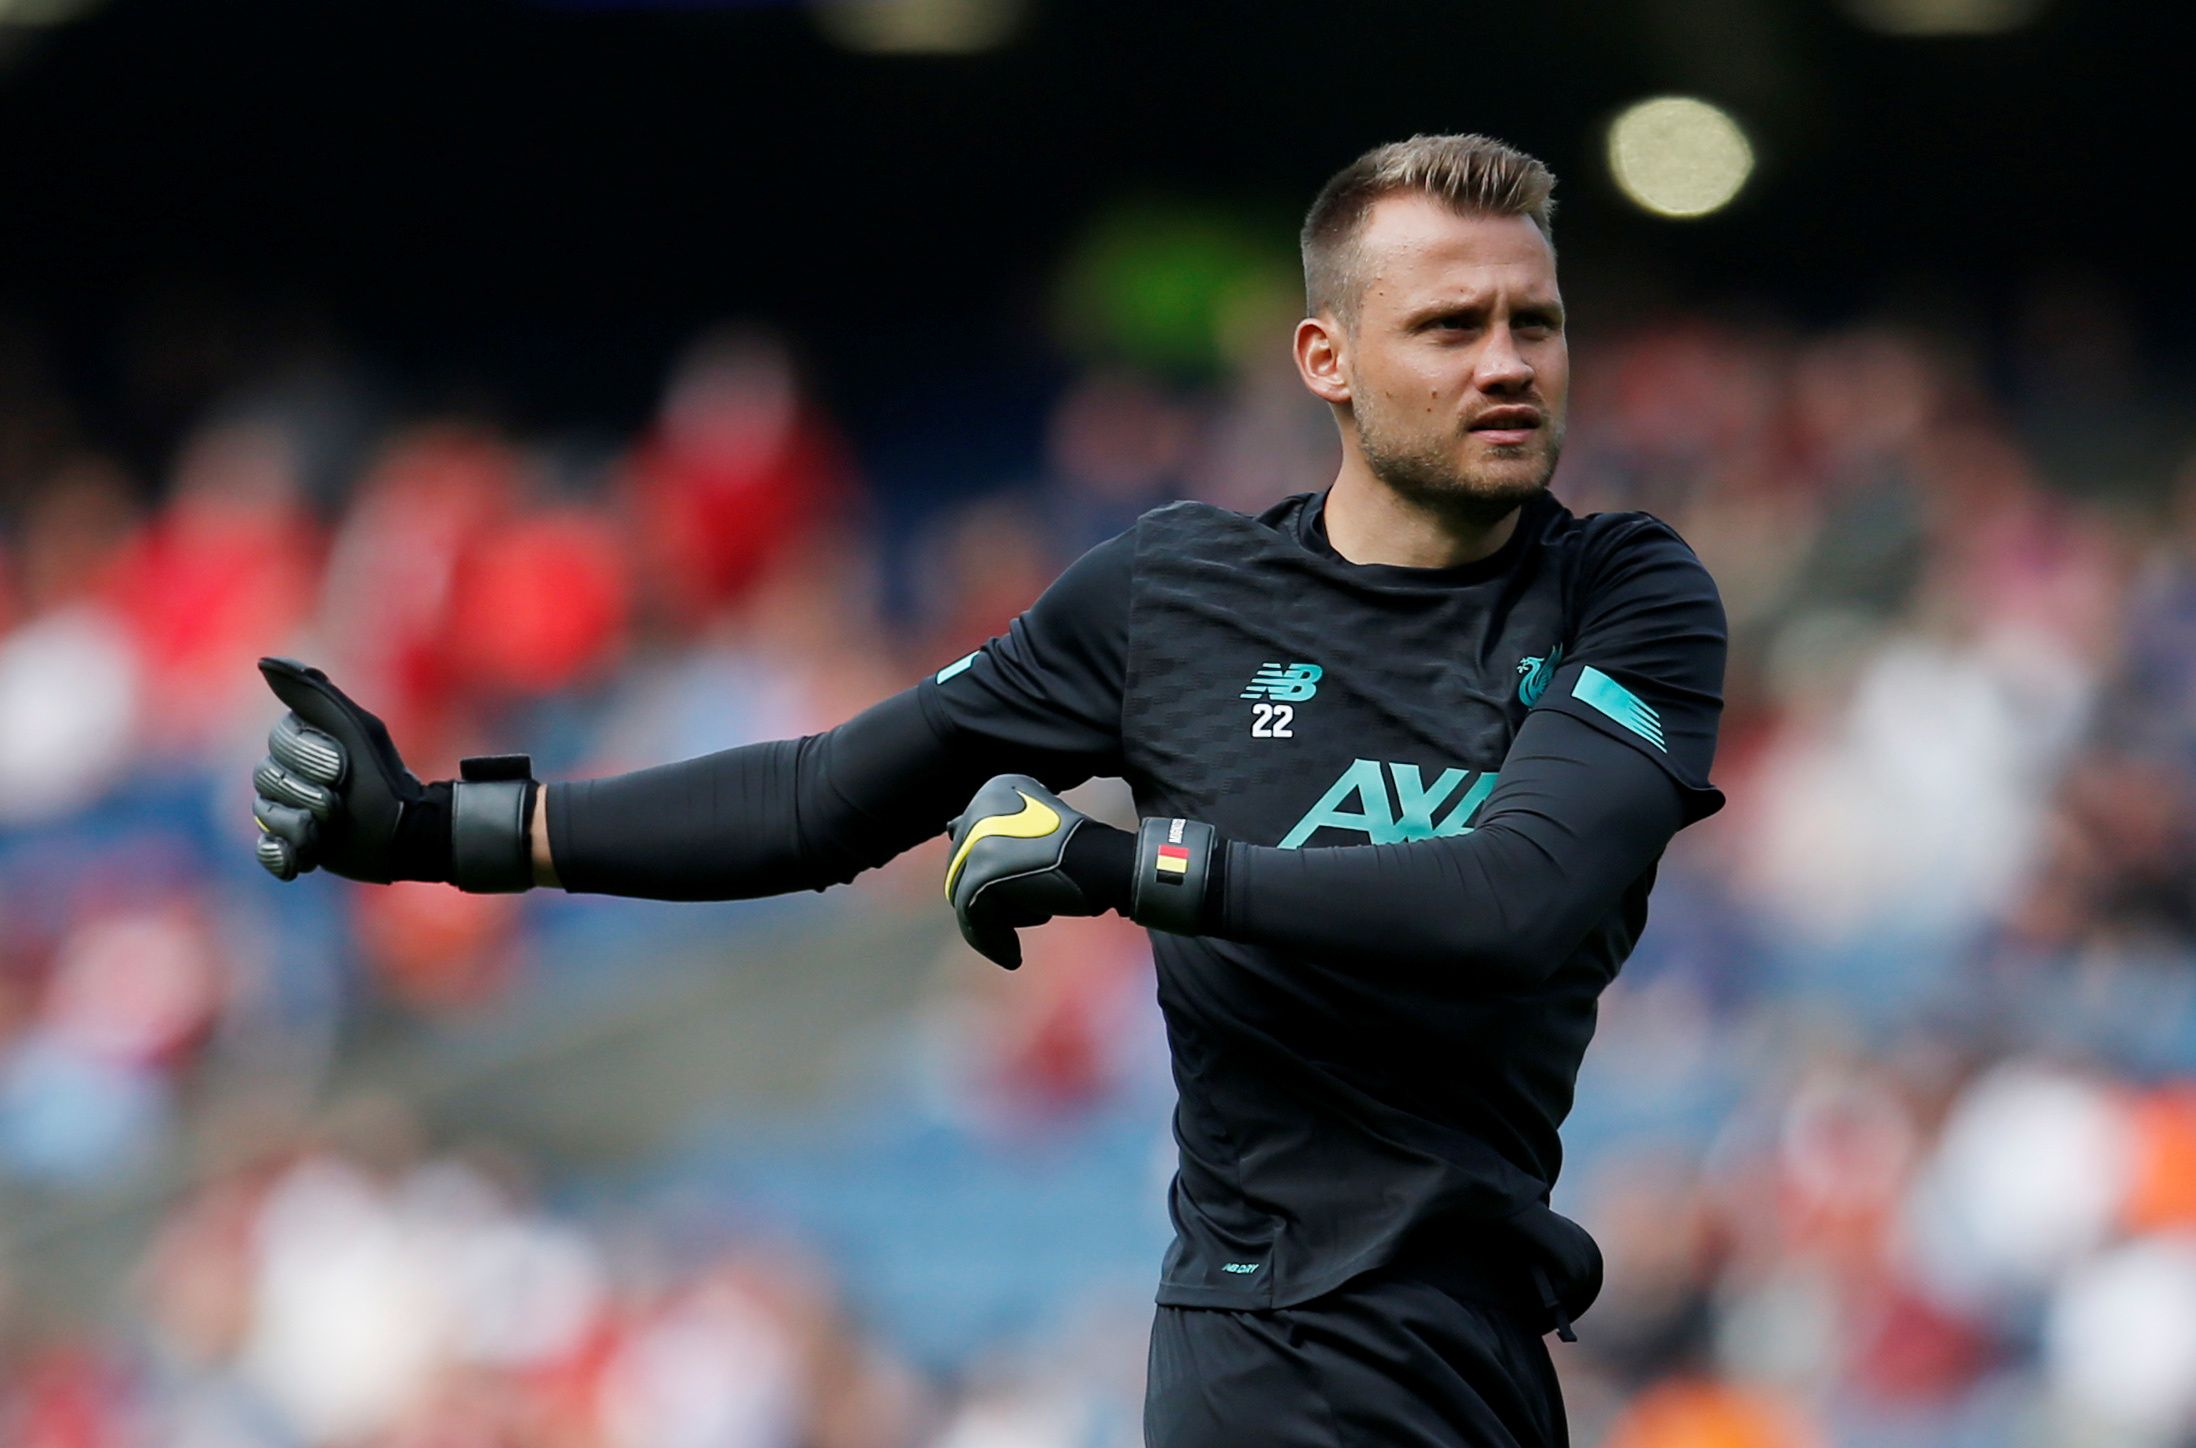 Soccer Football - Pre Season Friendly - Napoli v Liverpool - BT Murrayfield Stadium, Edinburgh, Britain - July 28, 2019  Liverpool's Simon Mignolet during the warm up before the match    Action Images via Reuters/Ed Sykes